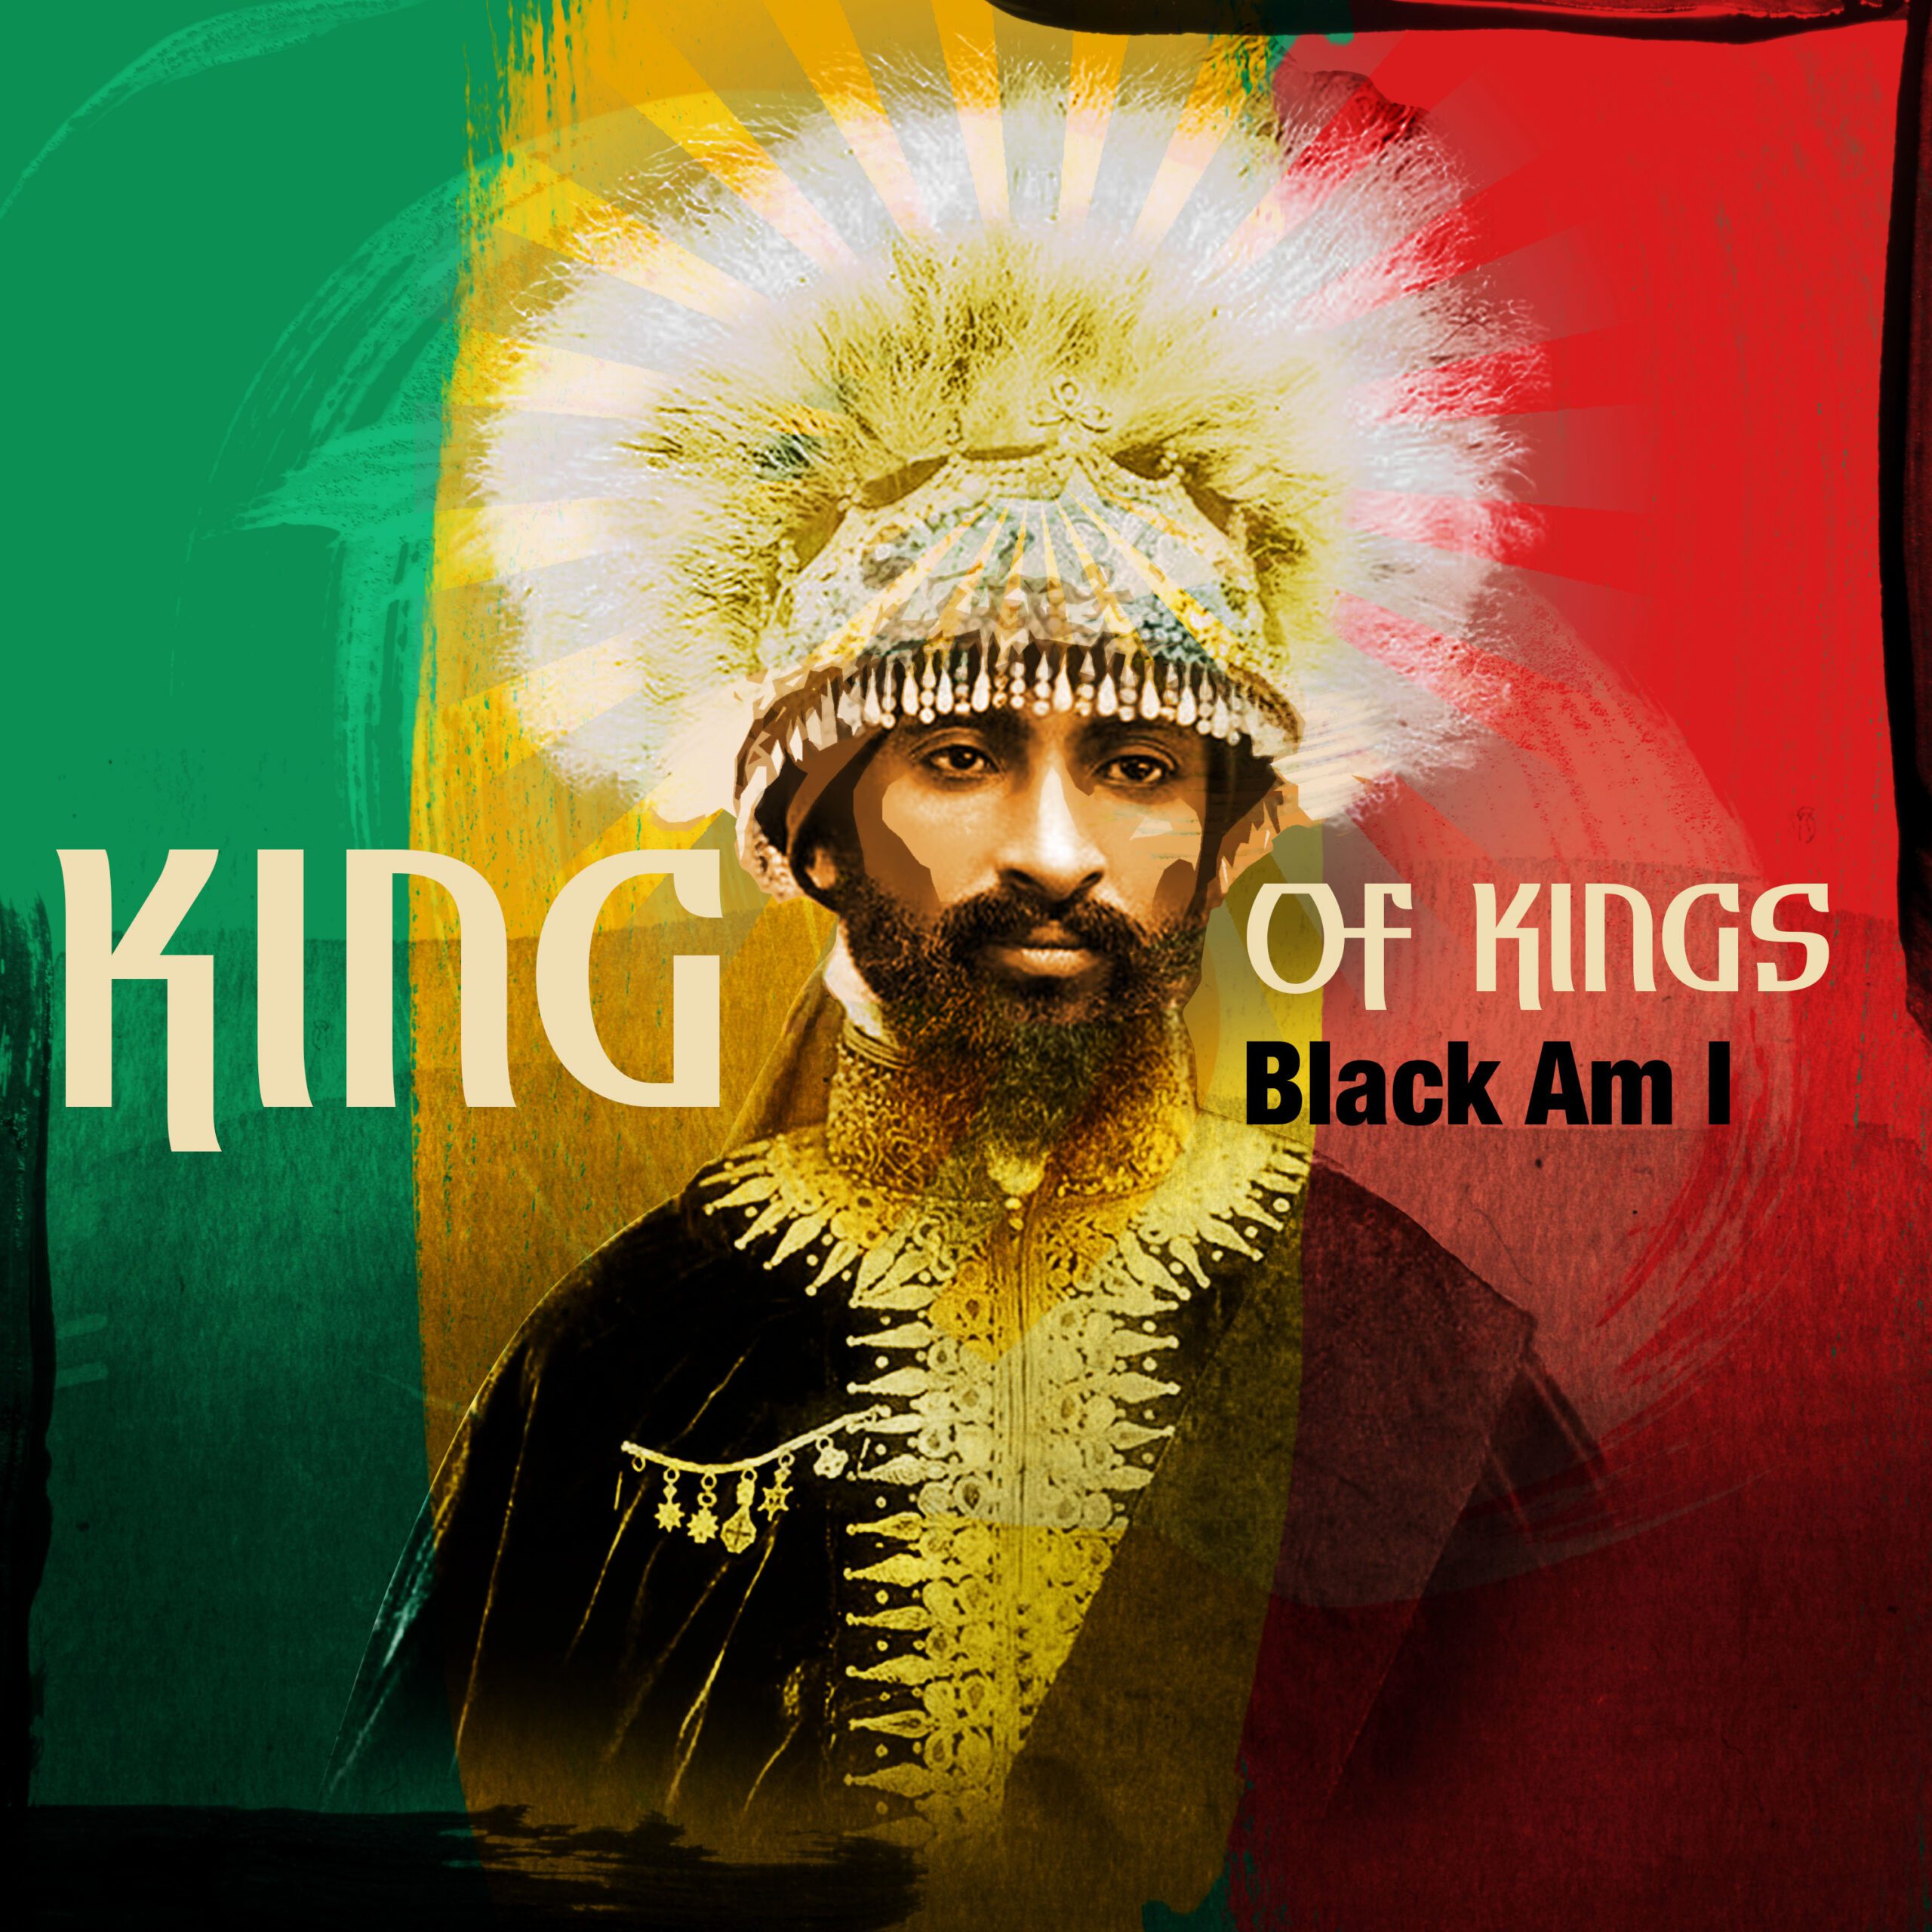 New Song by Black Am I – “King of Kings”